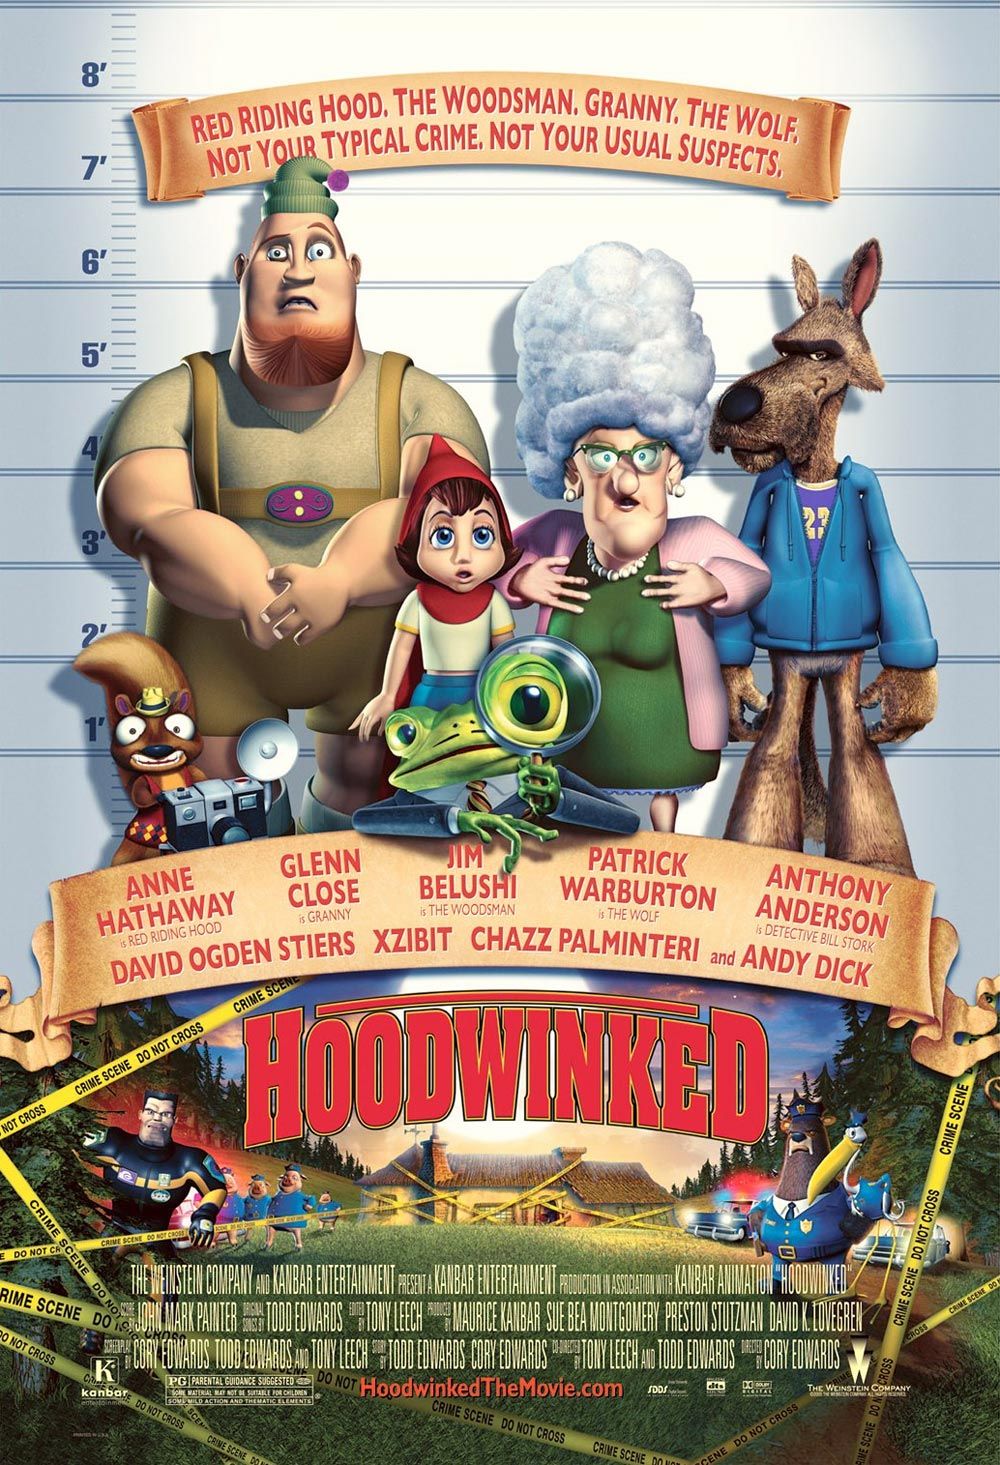 Return to Main Page for Hoodwinked Posters